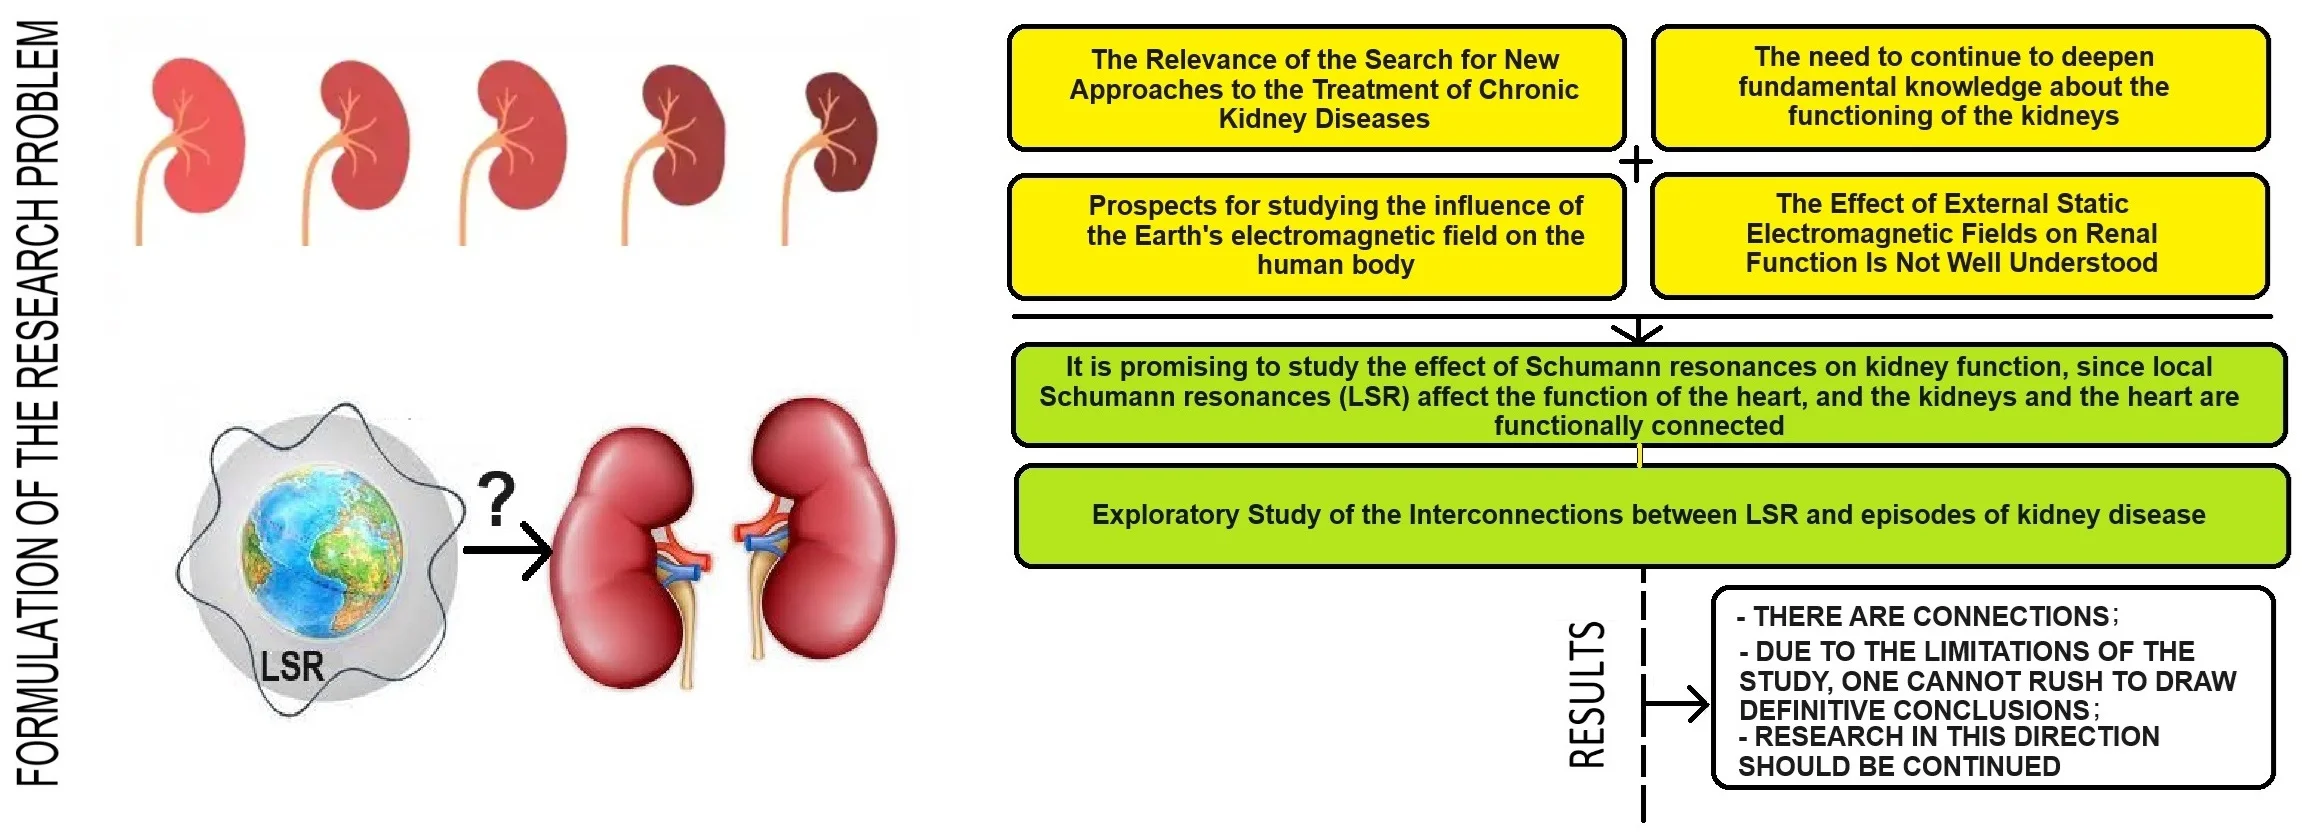 Interconnections between local Schumann resonances and episodes of kidney disease